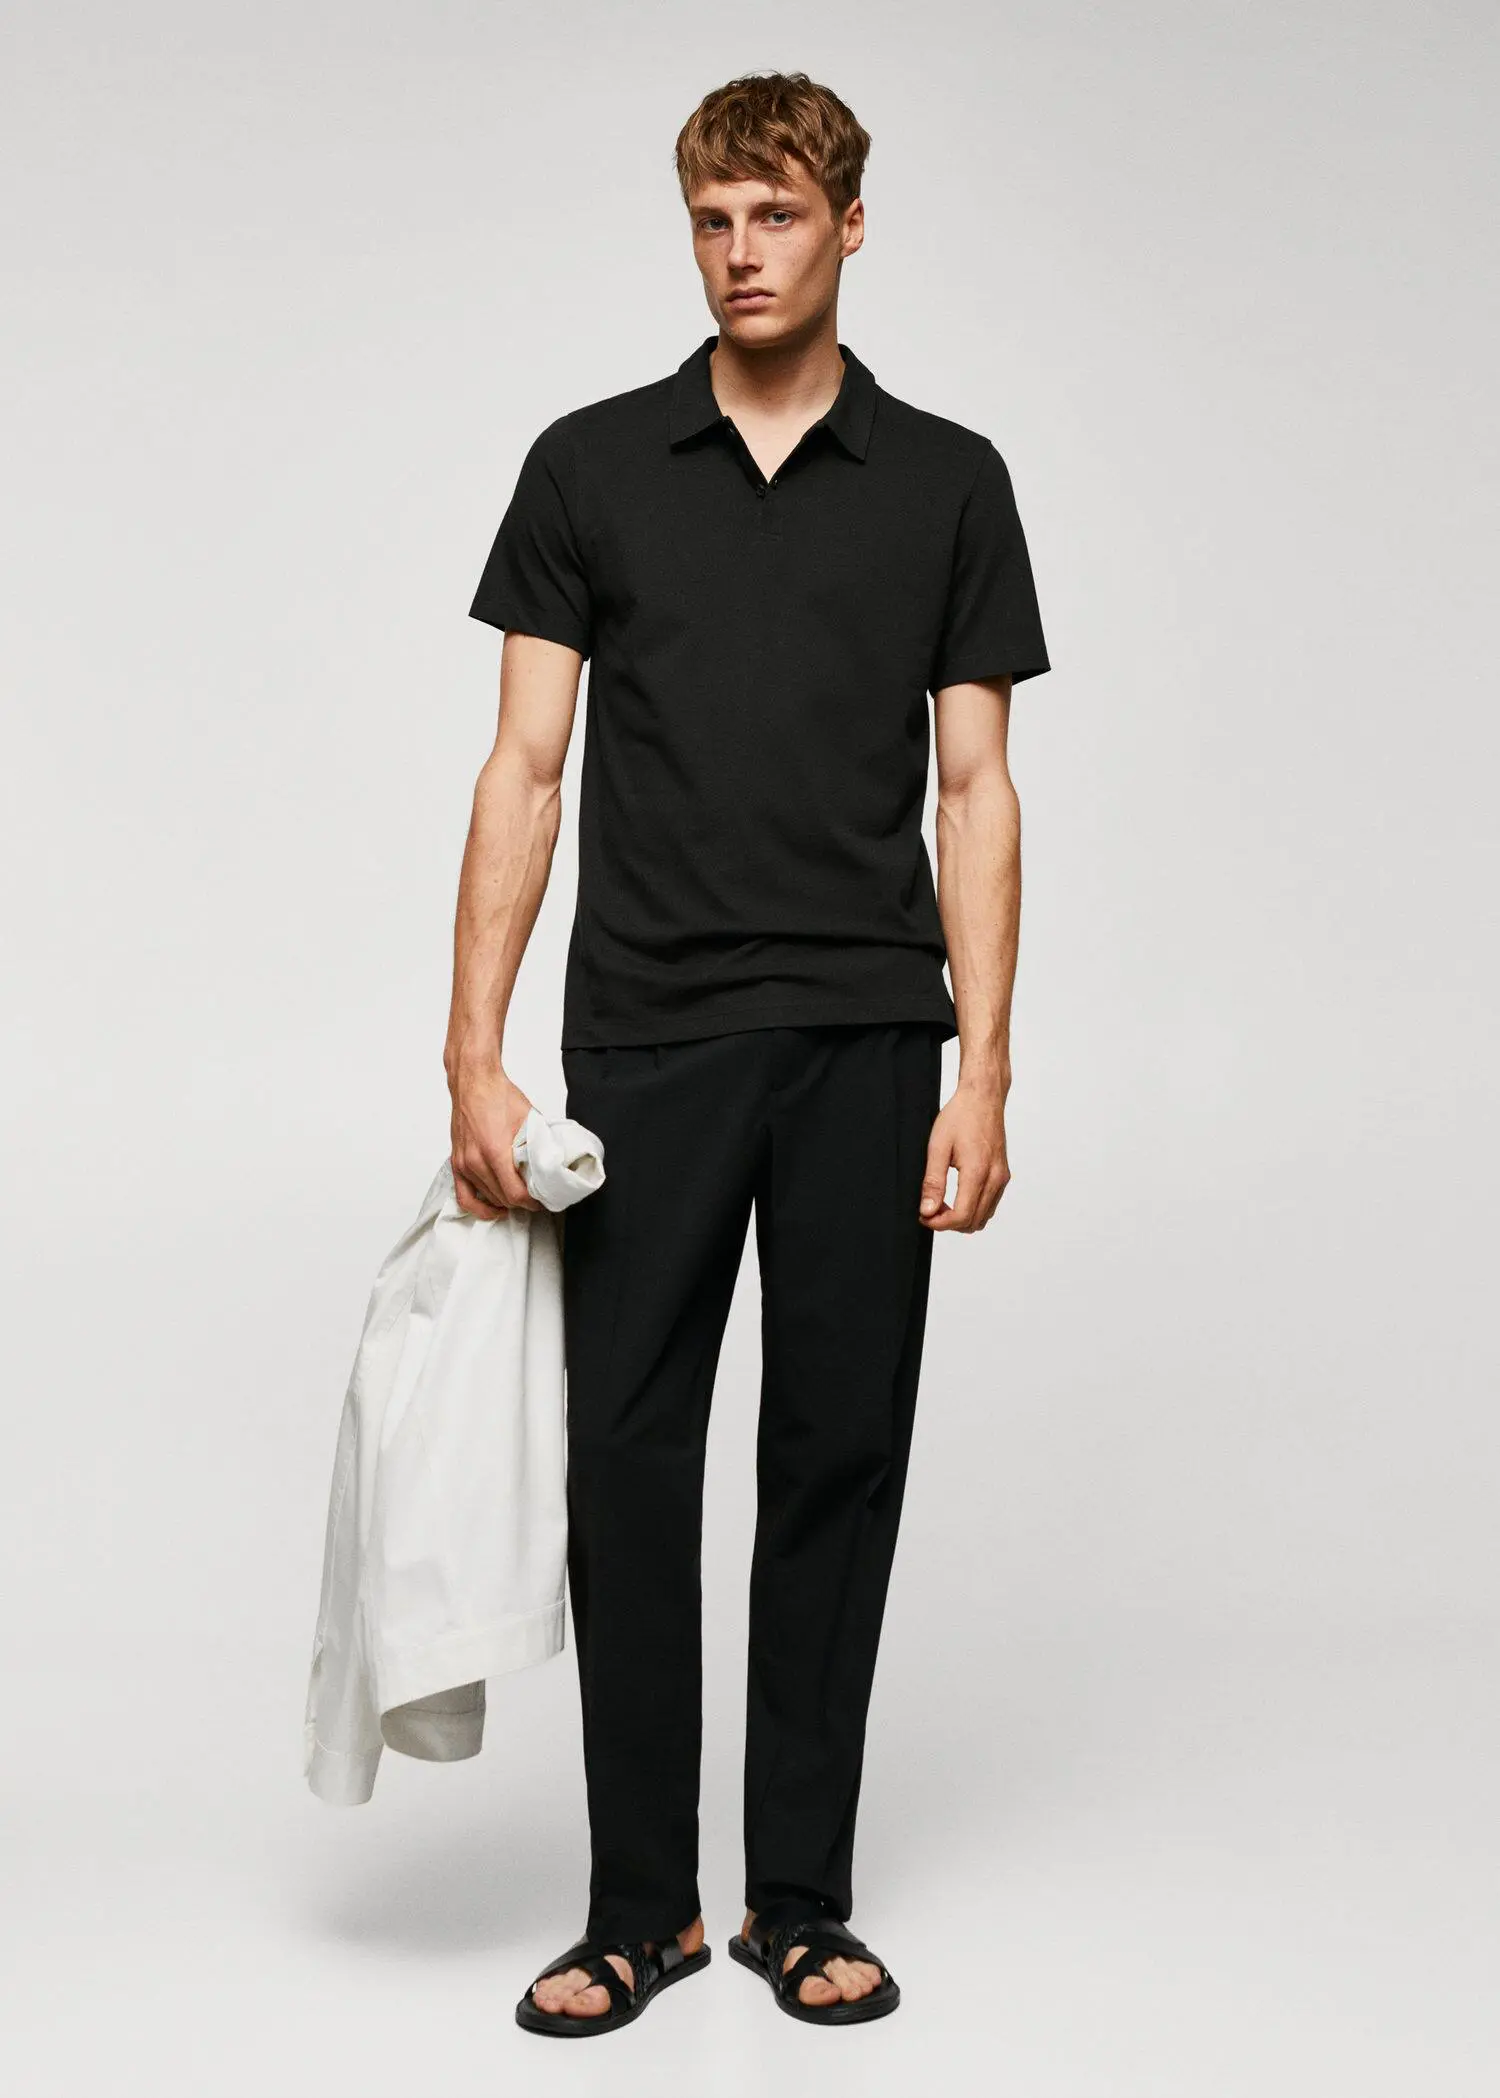 Mango Slim-fit textured cotton polo shirt. a man in a black shirt and black pants. 